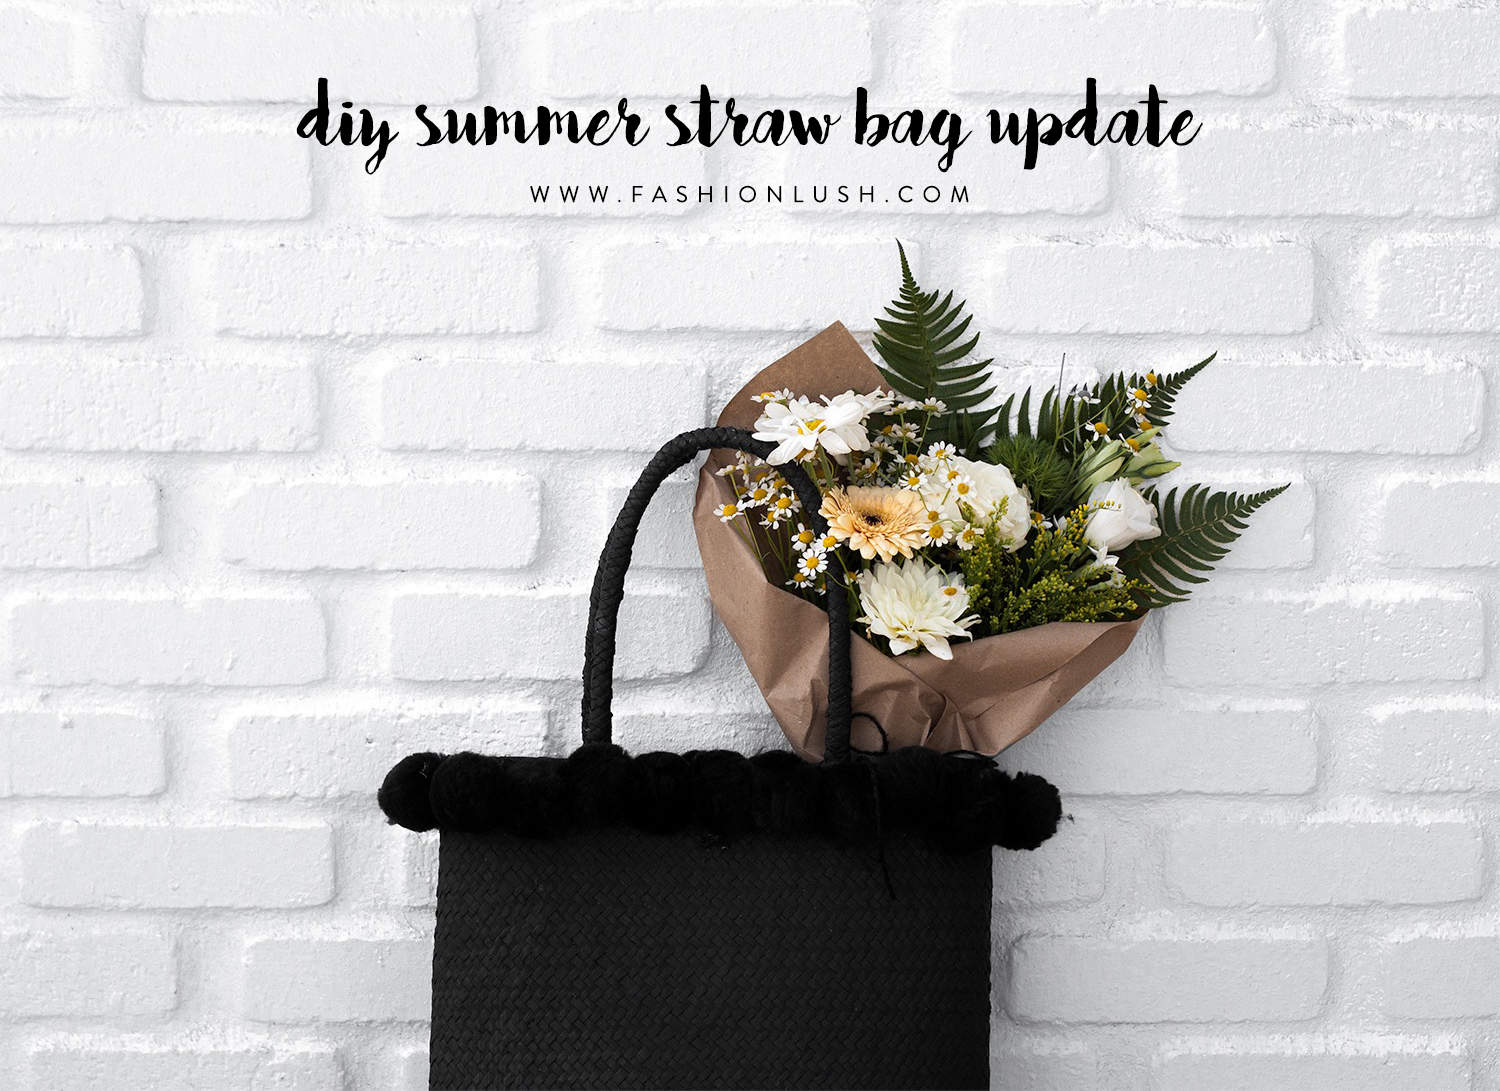 fashionlush, update your summer straw bag, do it yourself